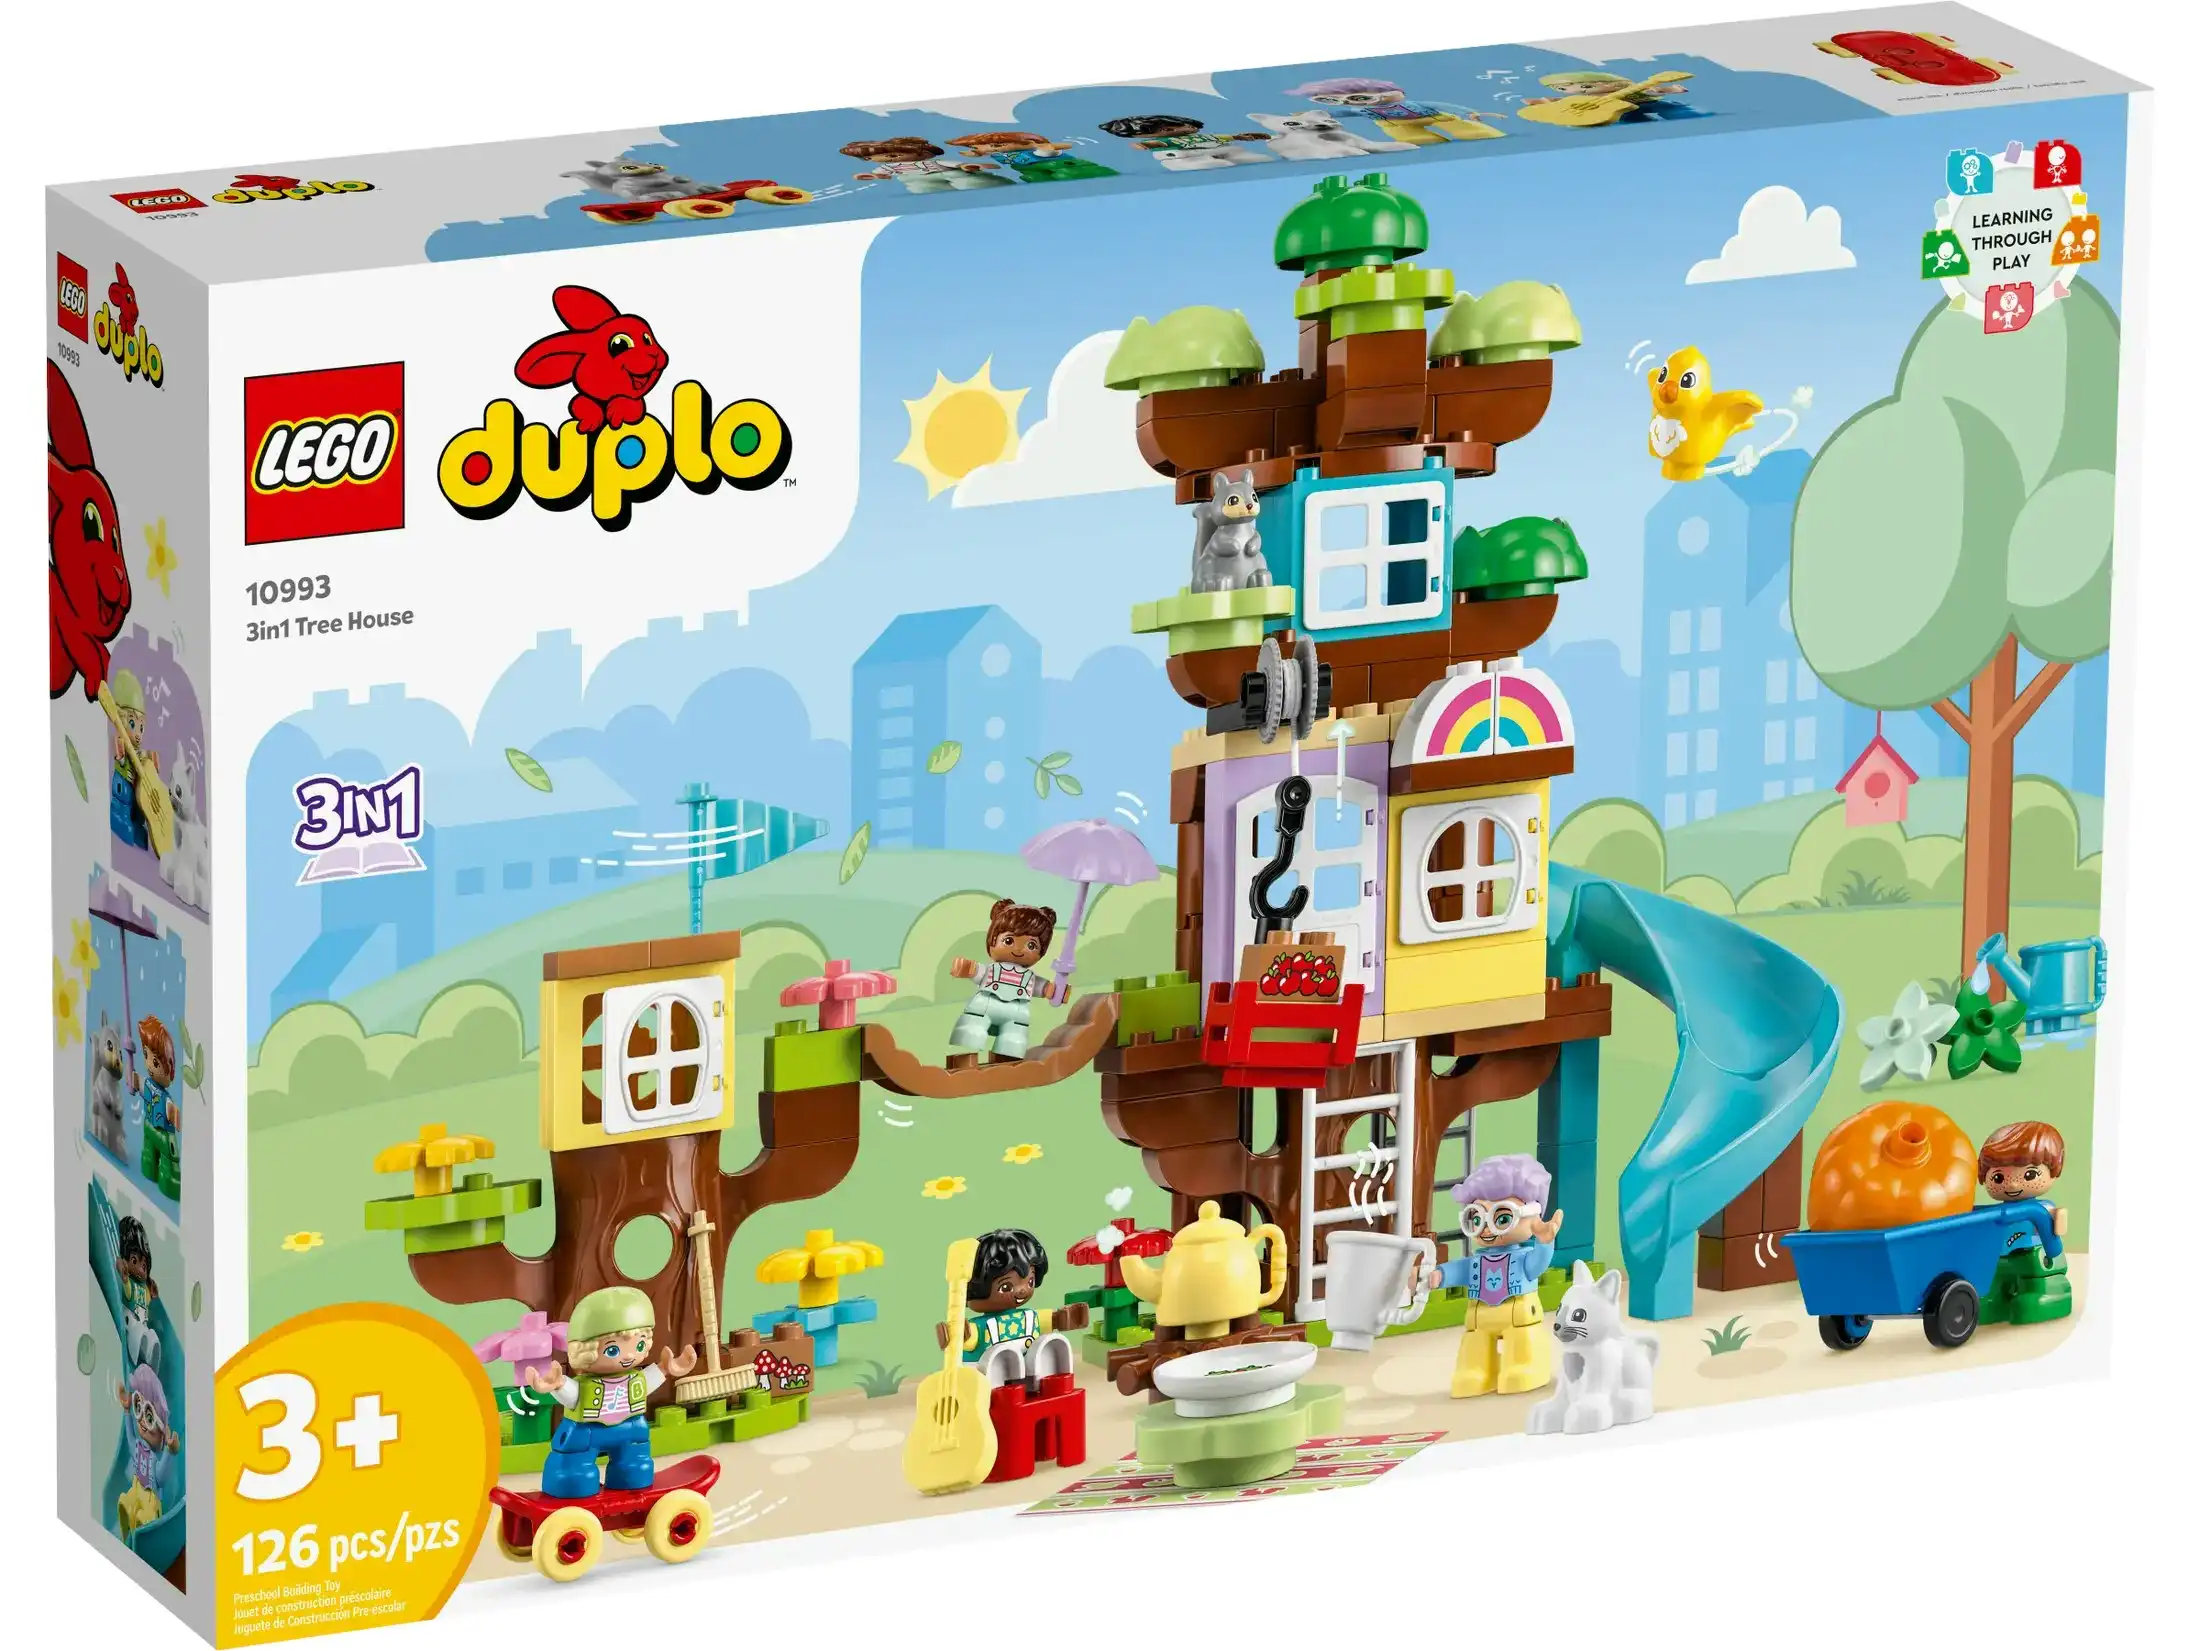 LEGO 10993 3in1 Tree House - Duplo